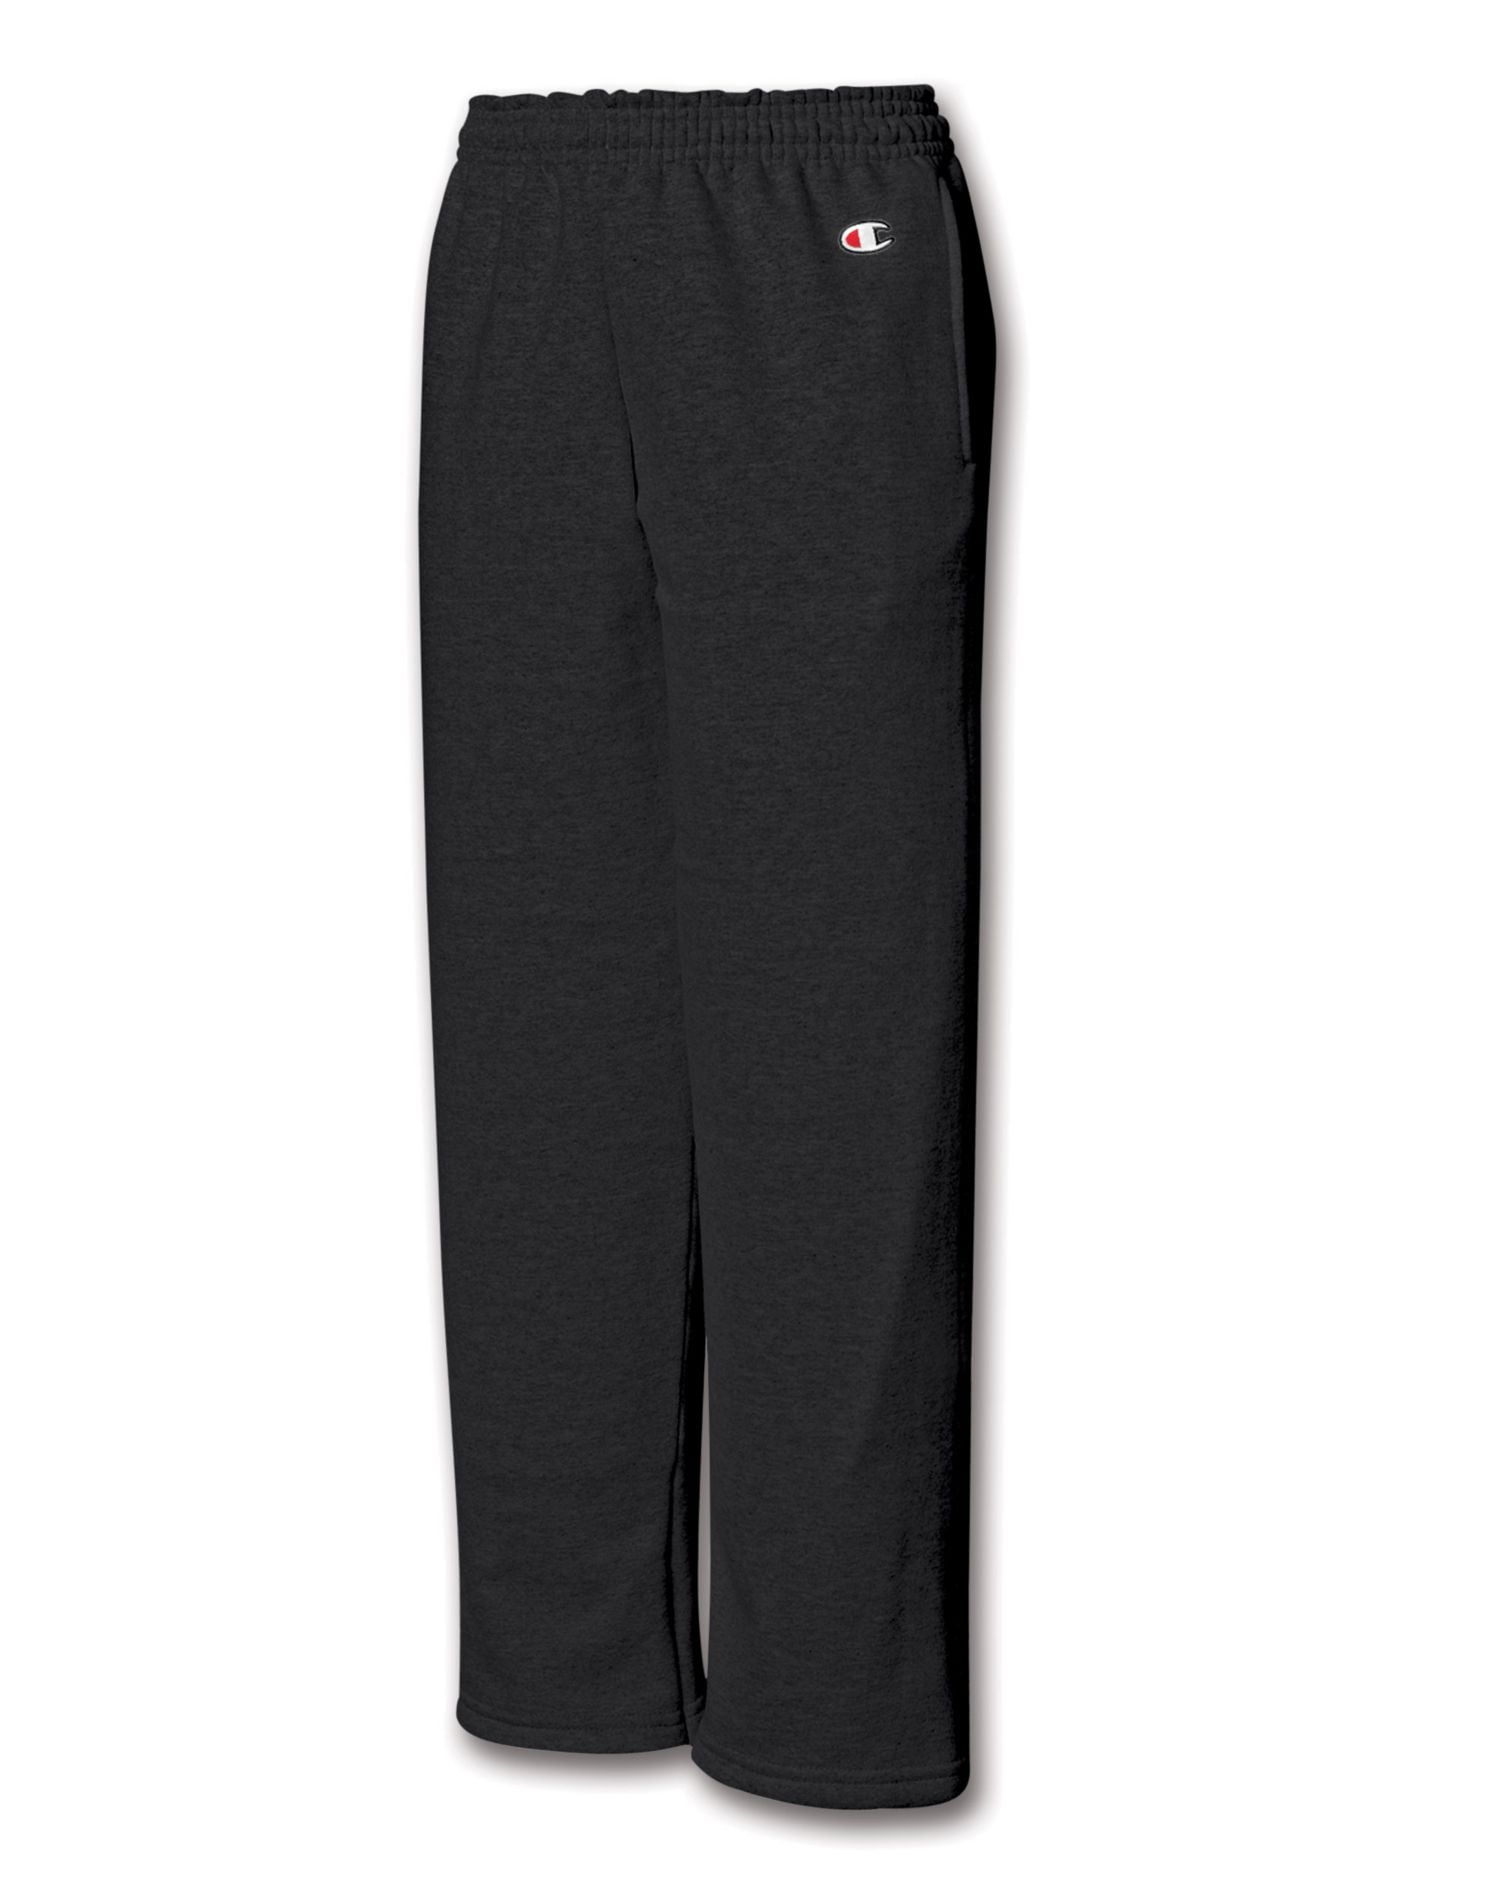 P890 Double Dry Eco Youth Open Bottom Sweatpants with Pockets - Walmart.com